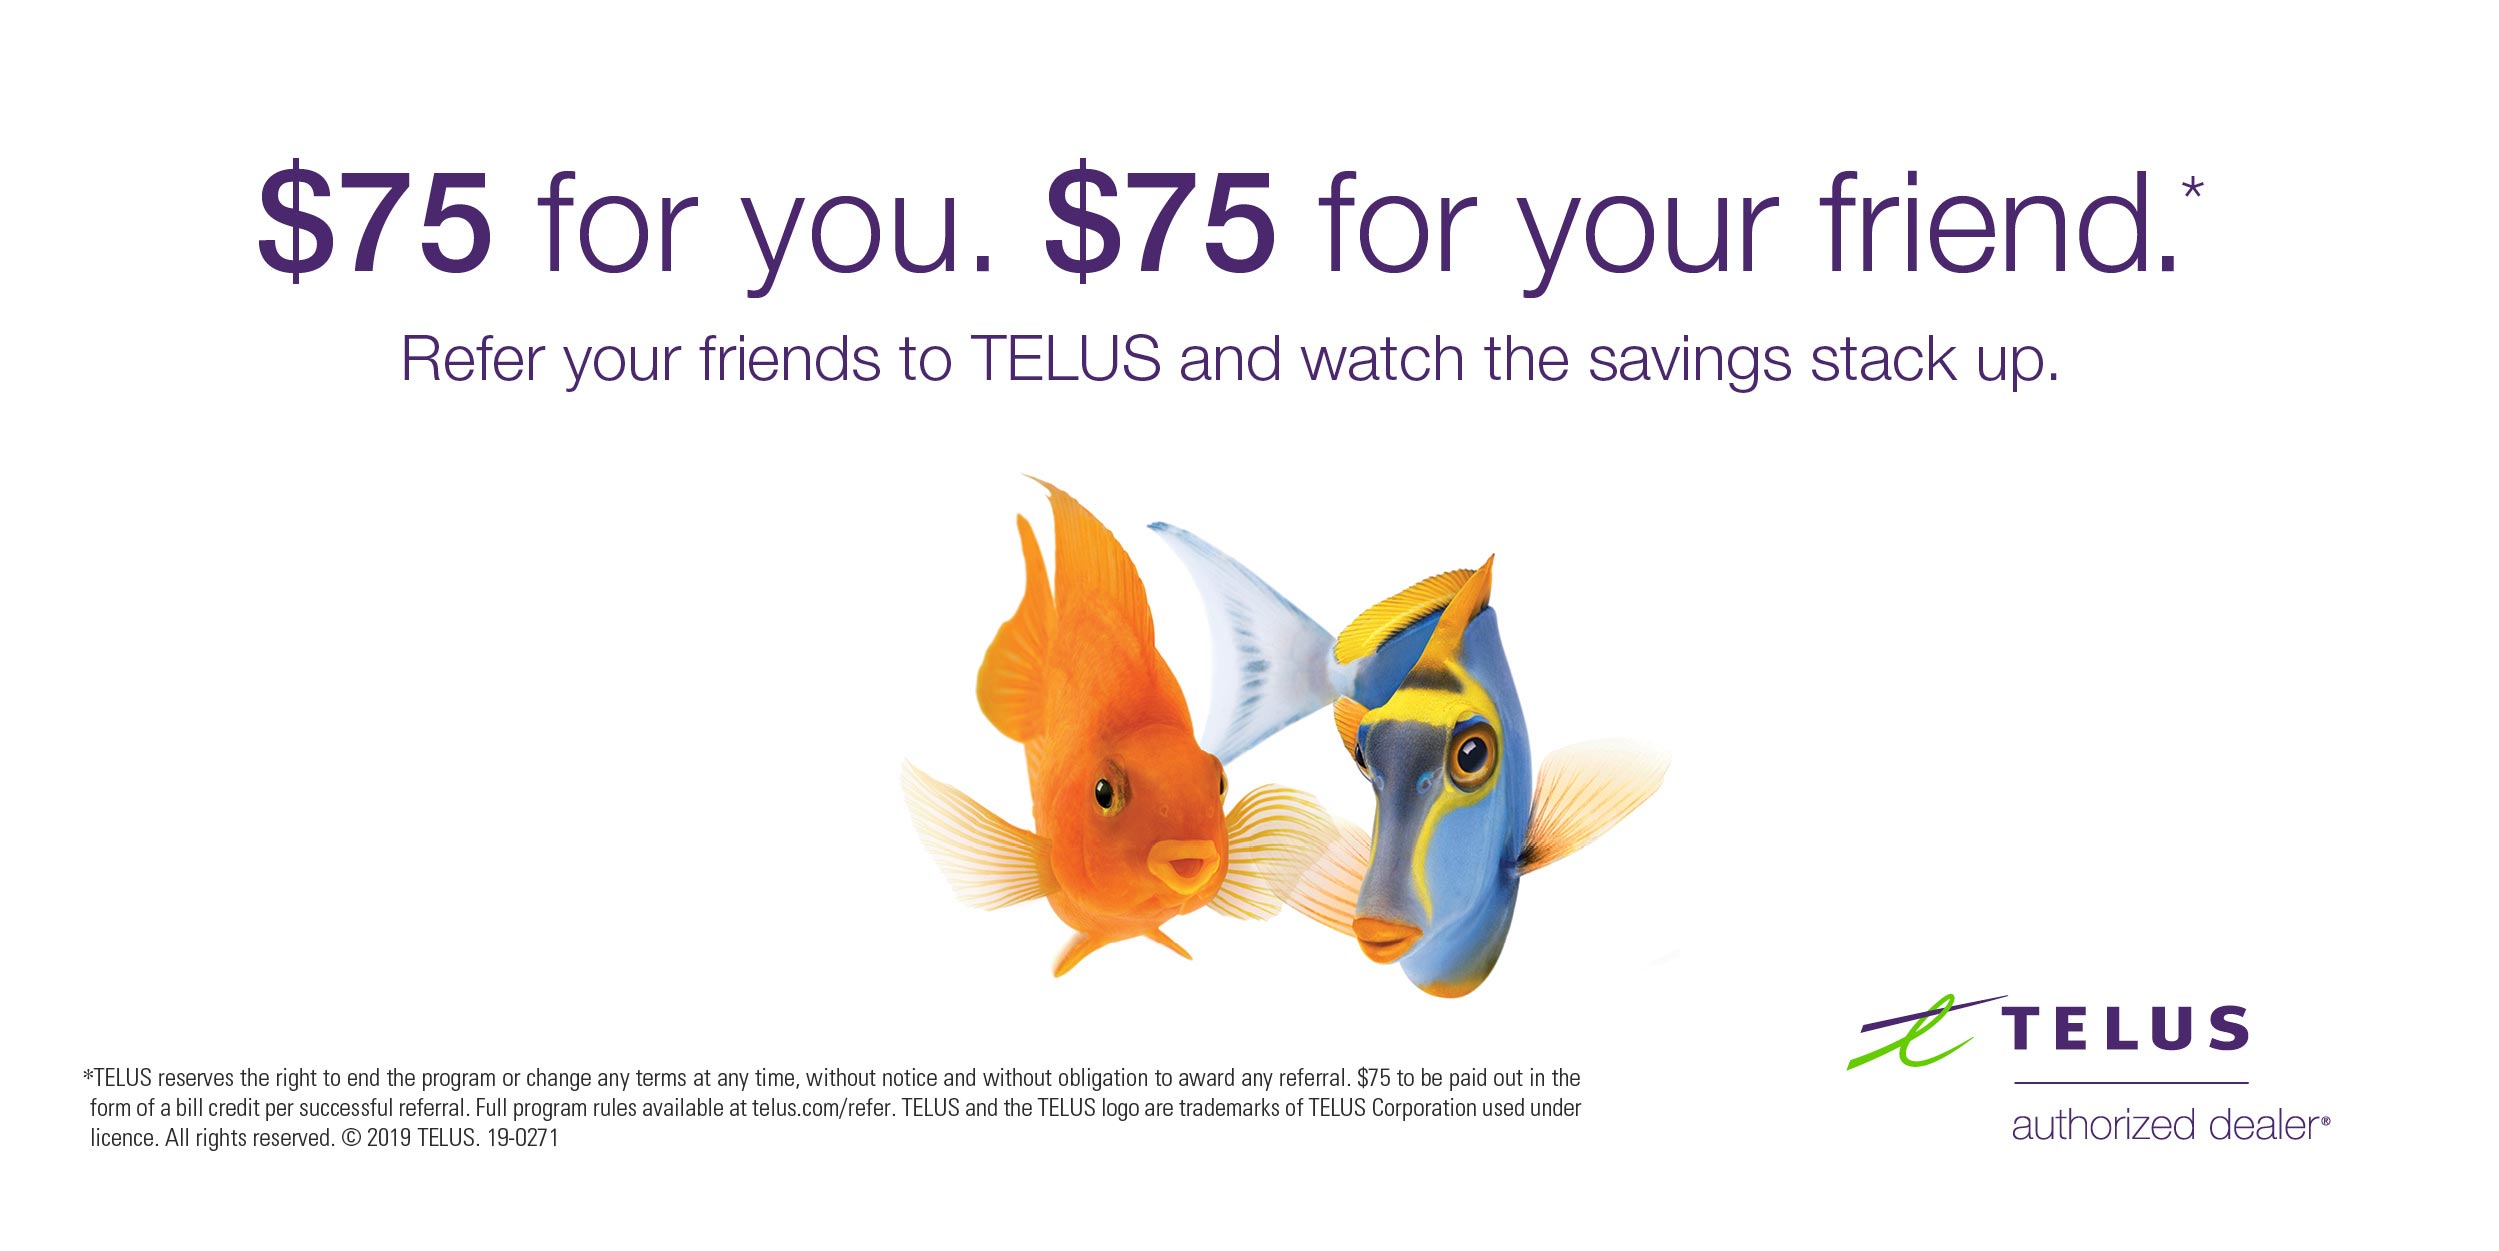 $50 for you. $50 for your friend. Refer your friends to TELUS and watch the savings stack up.